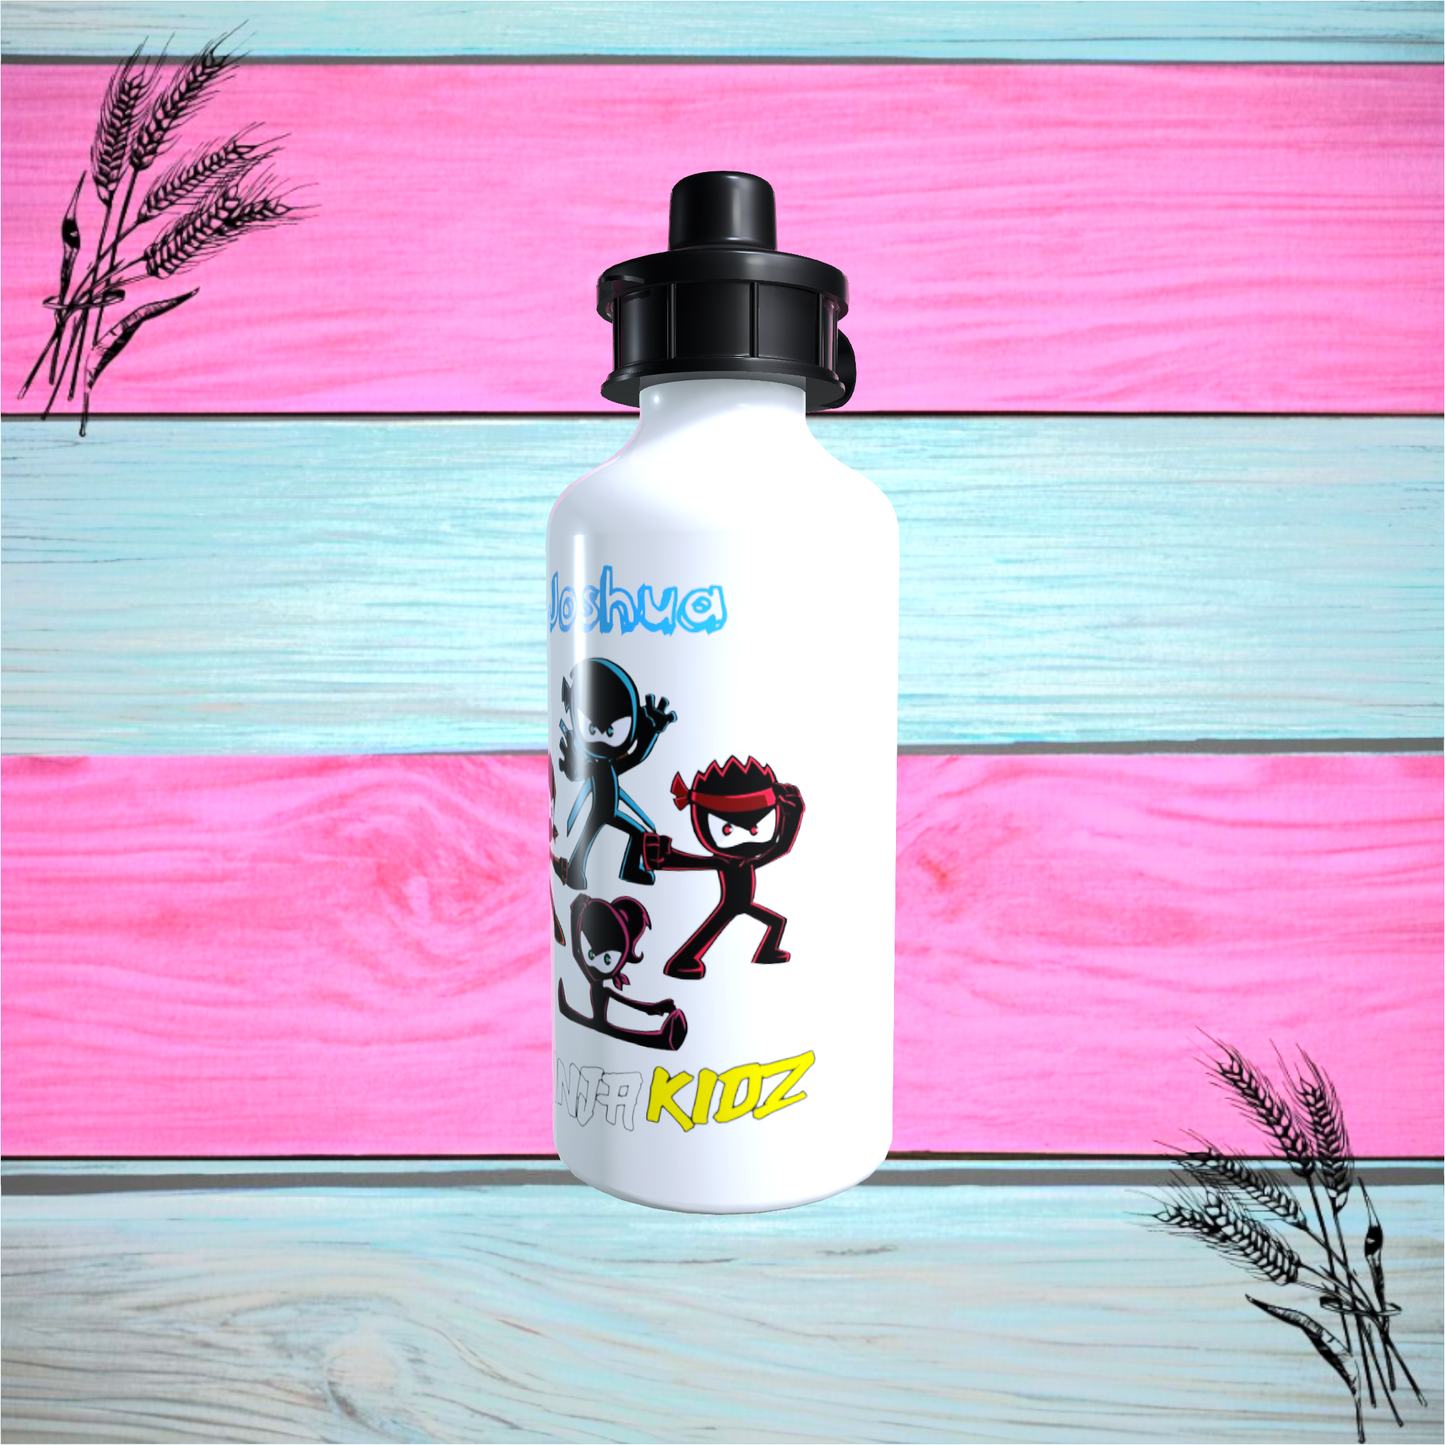 Printed 600ml Ninja Kidz Aluminium Water Bottle, Any Name, Available In White Or Silver